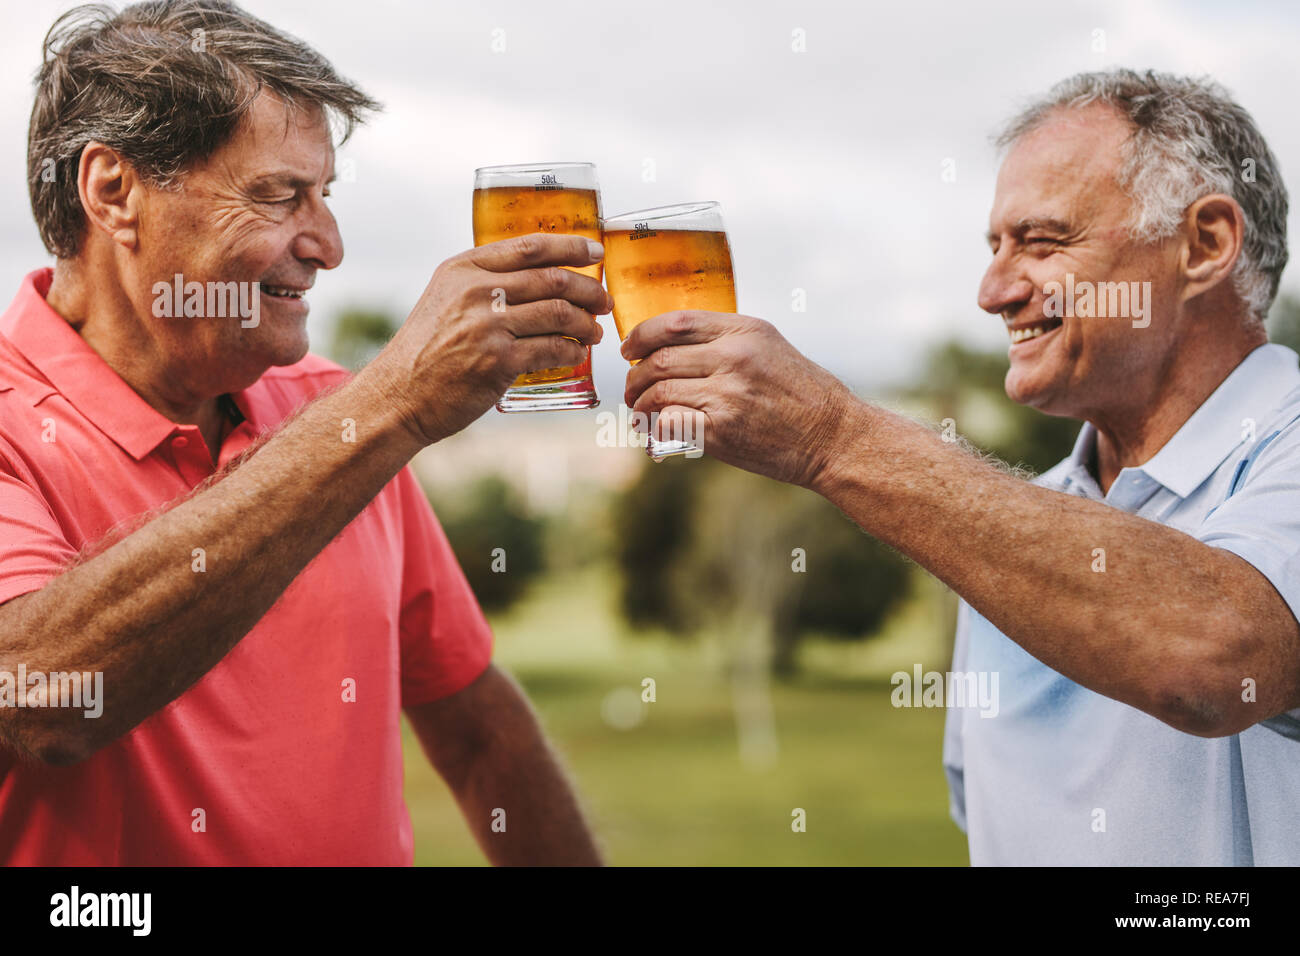 Two senior men toasting beer glasses outdoors. Smiling mature male friends cheering beers while standing outside. Stock Photo